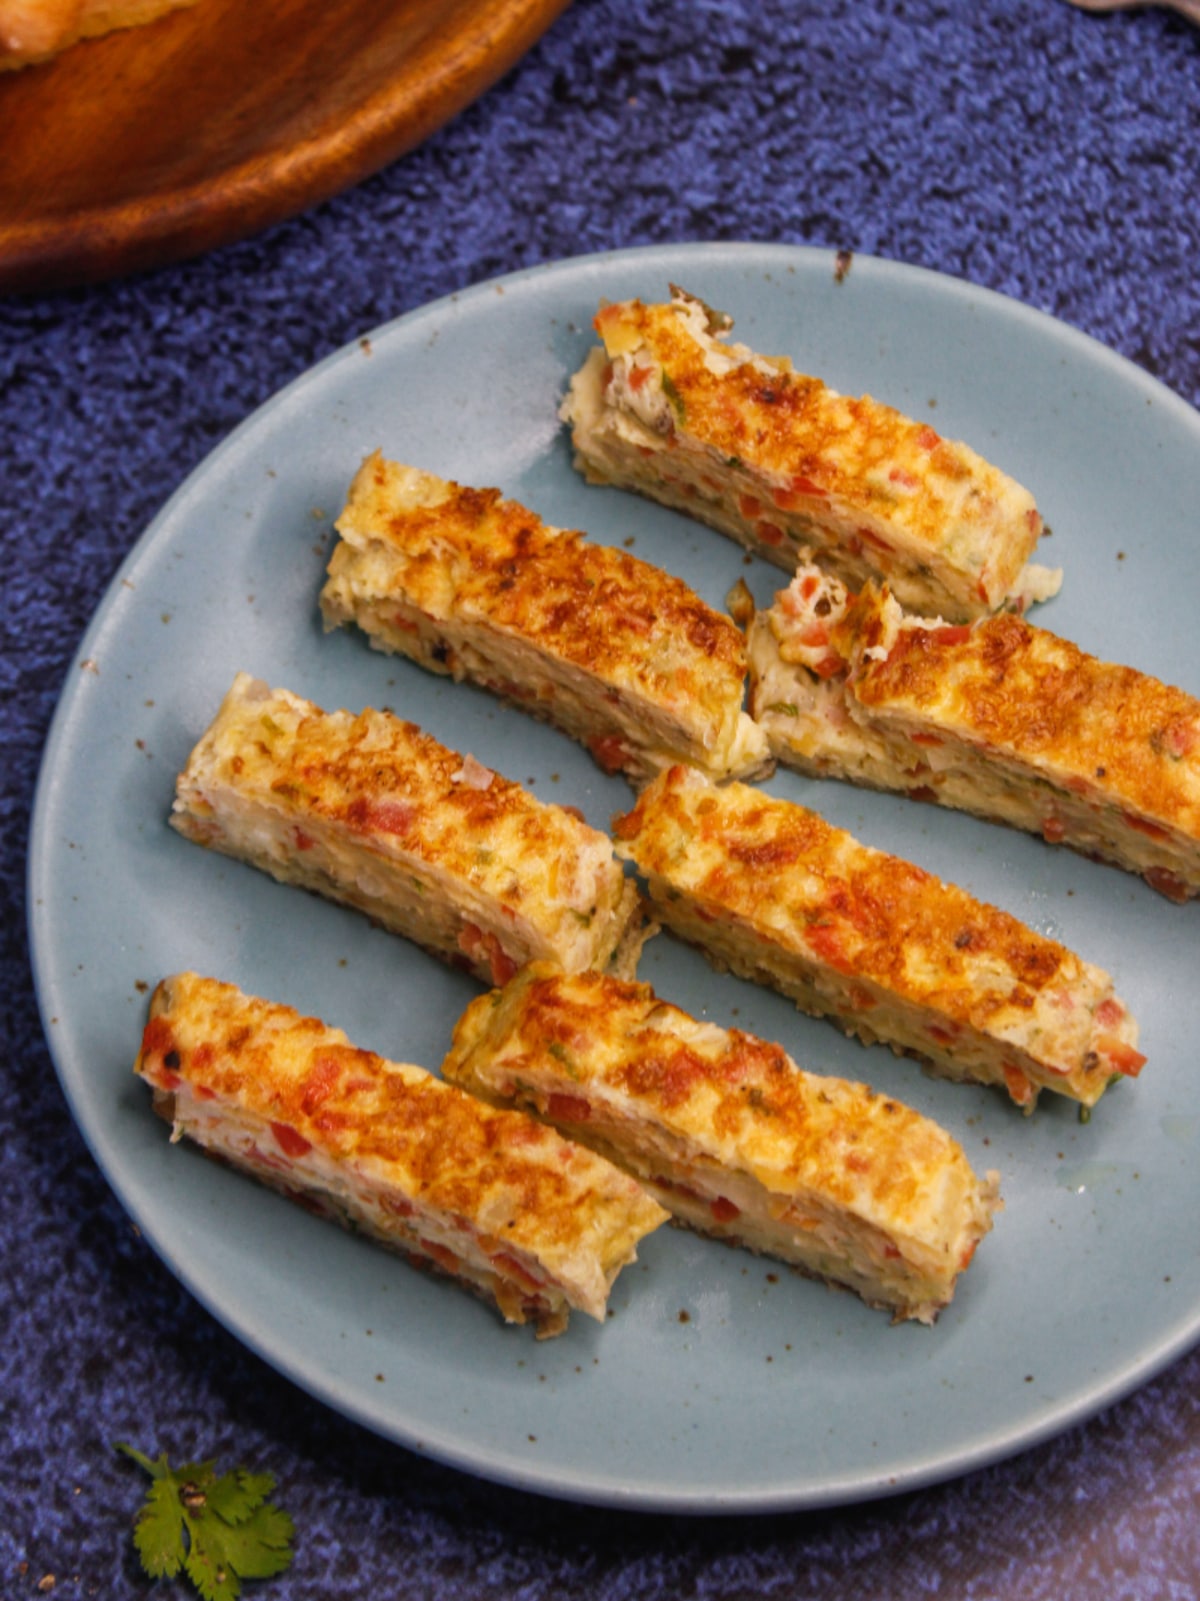 Top view of Cheesy Egg Roll